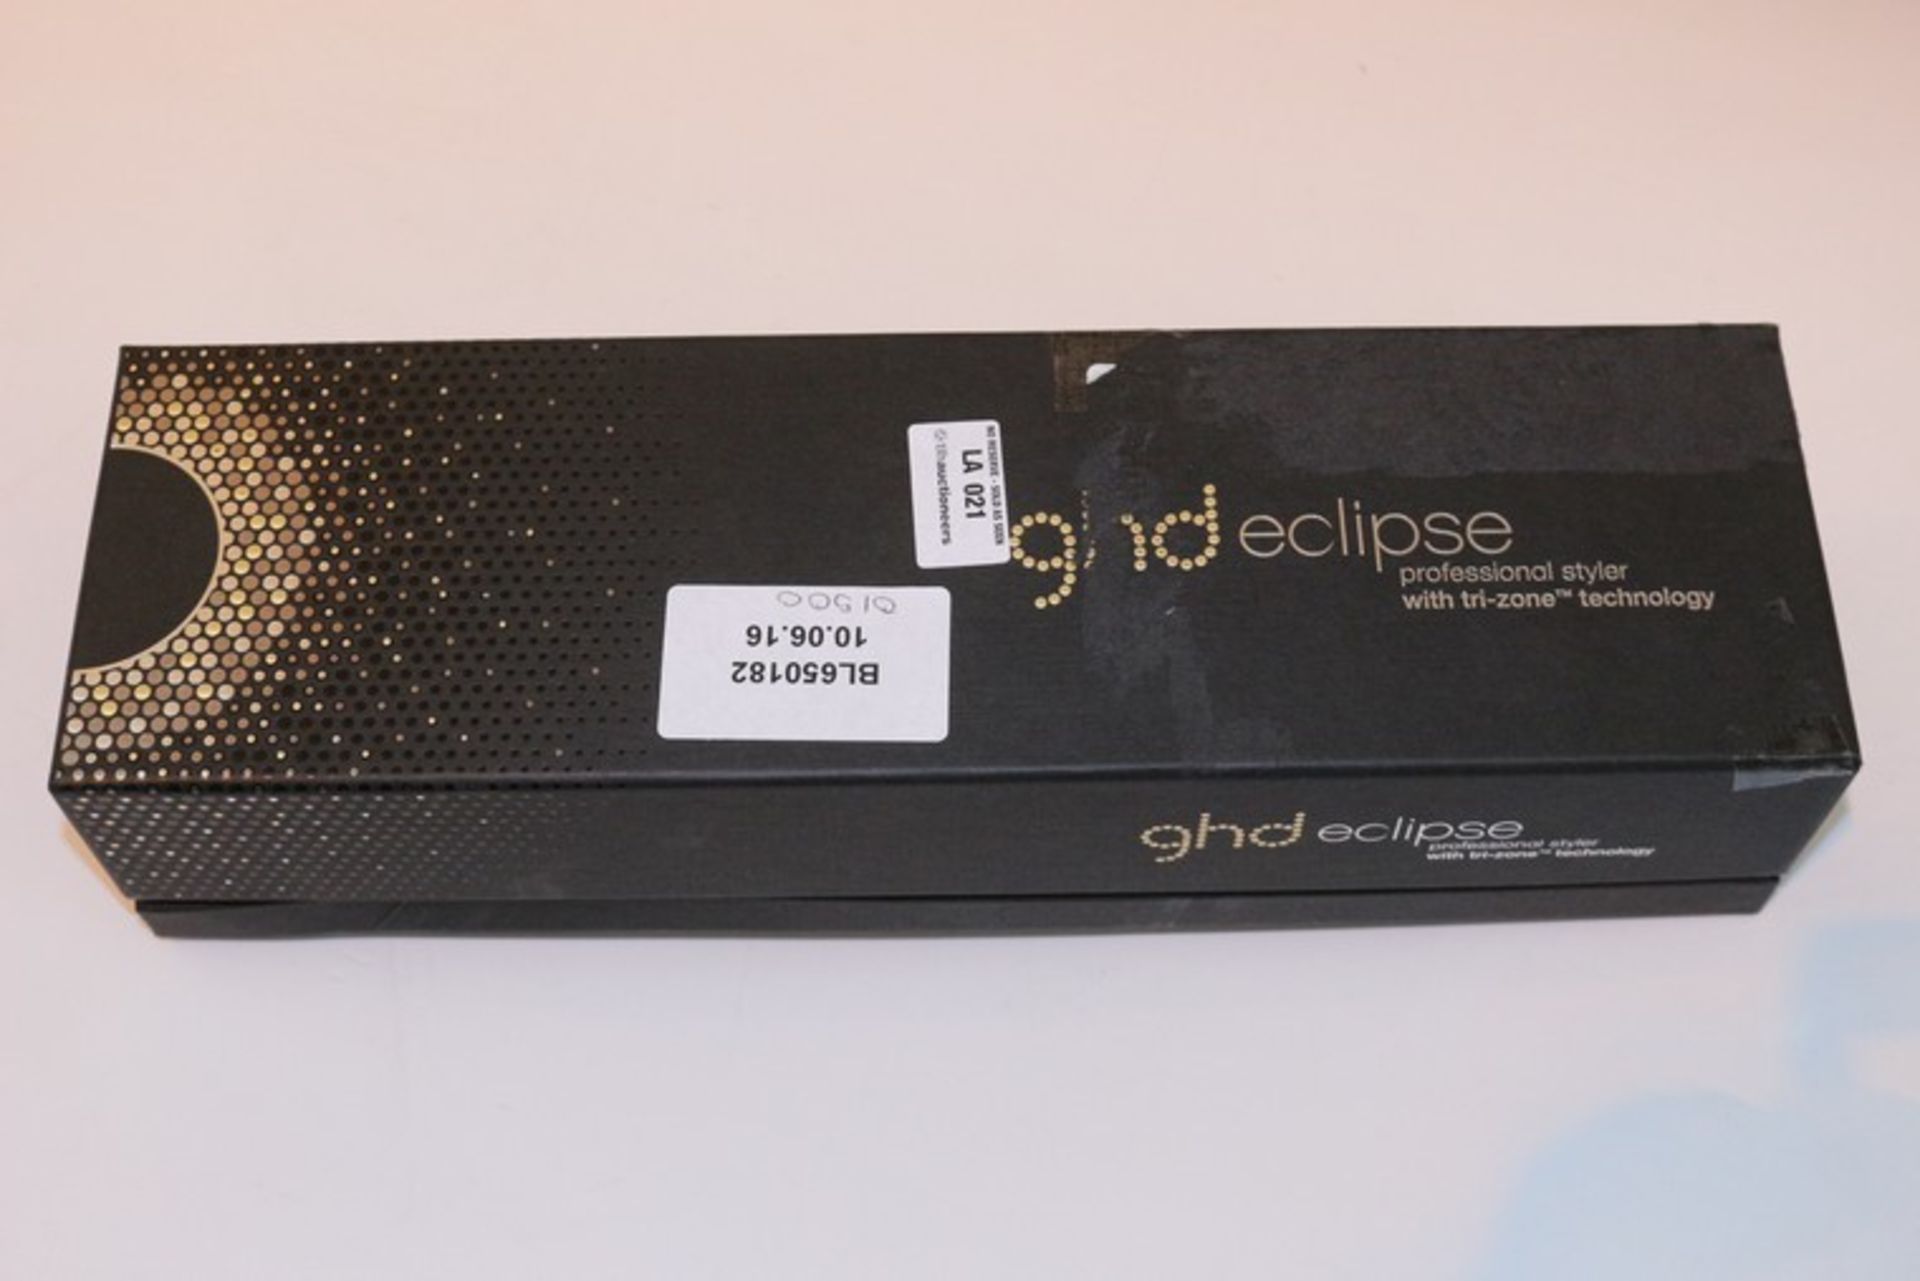 1 x BOXED PAIR OF GHD ECLIPSE LADIES PROFESSIONAL HAIR STRAIGHTENERS RRP £150 (10.6.16) *PLEASE NOTE